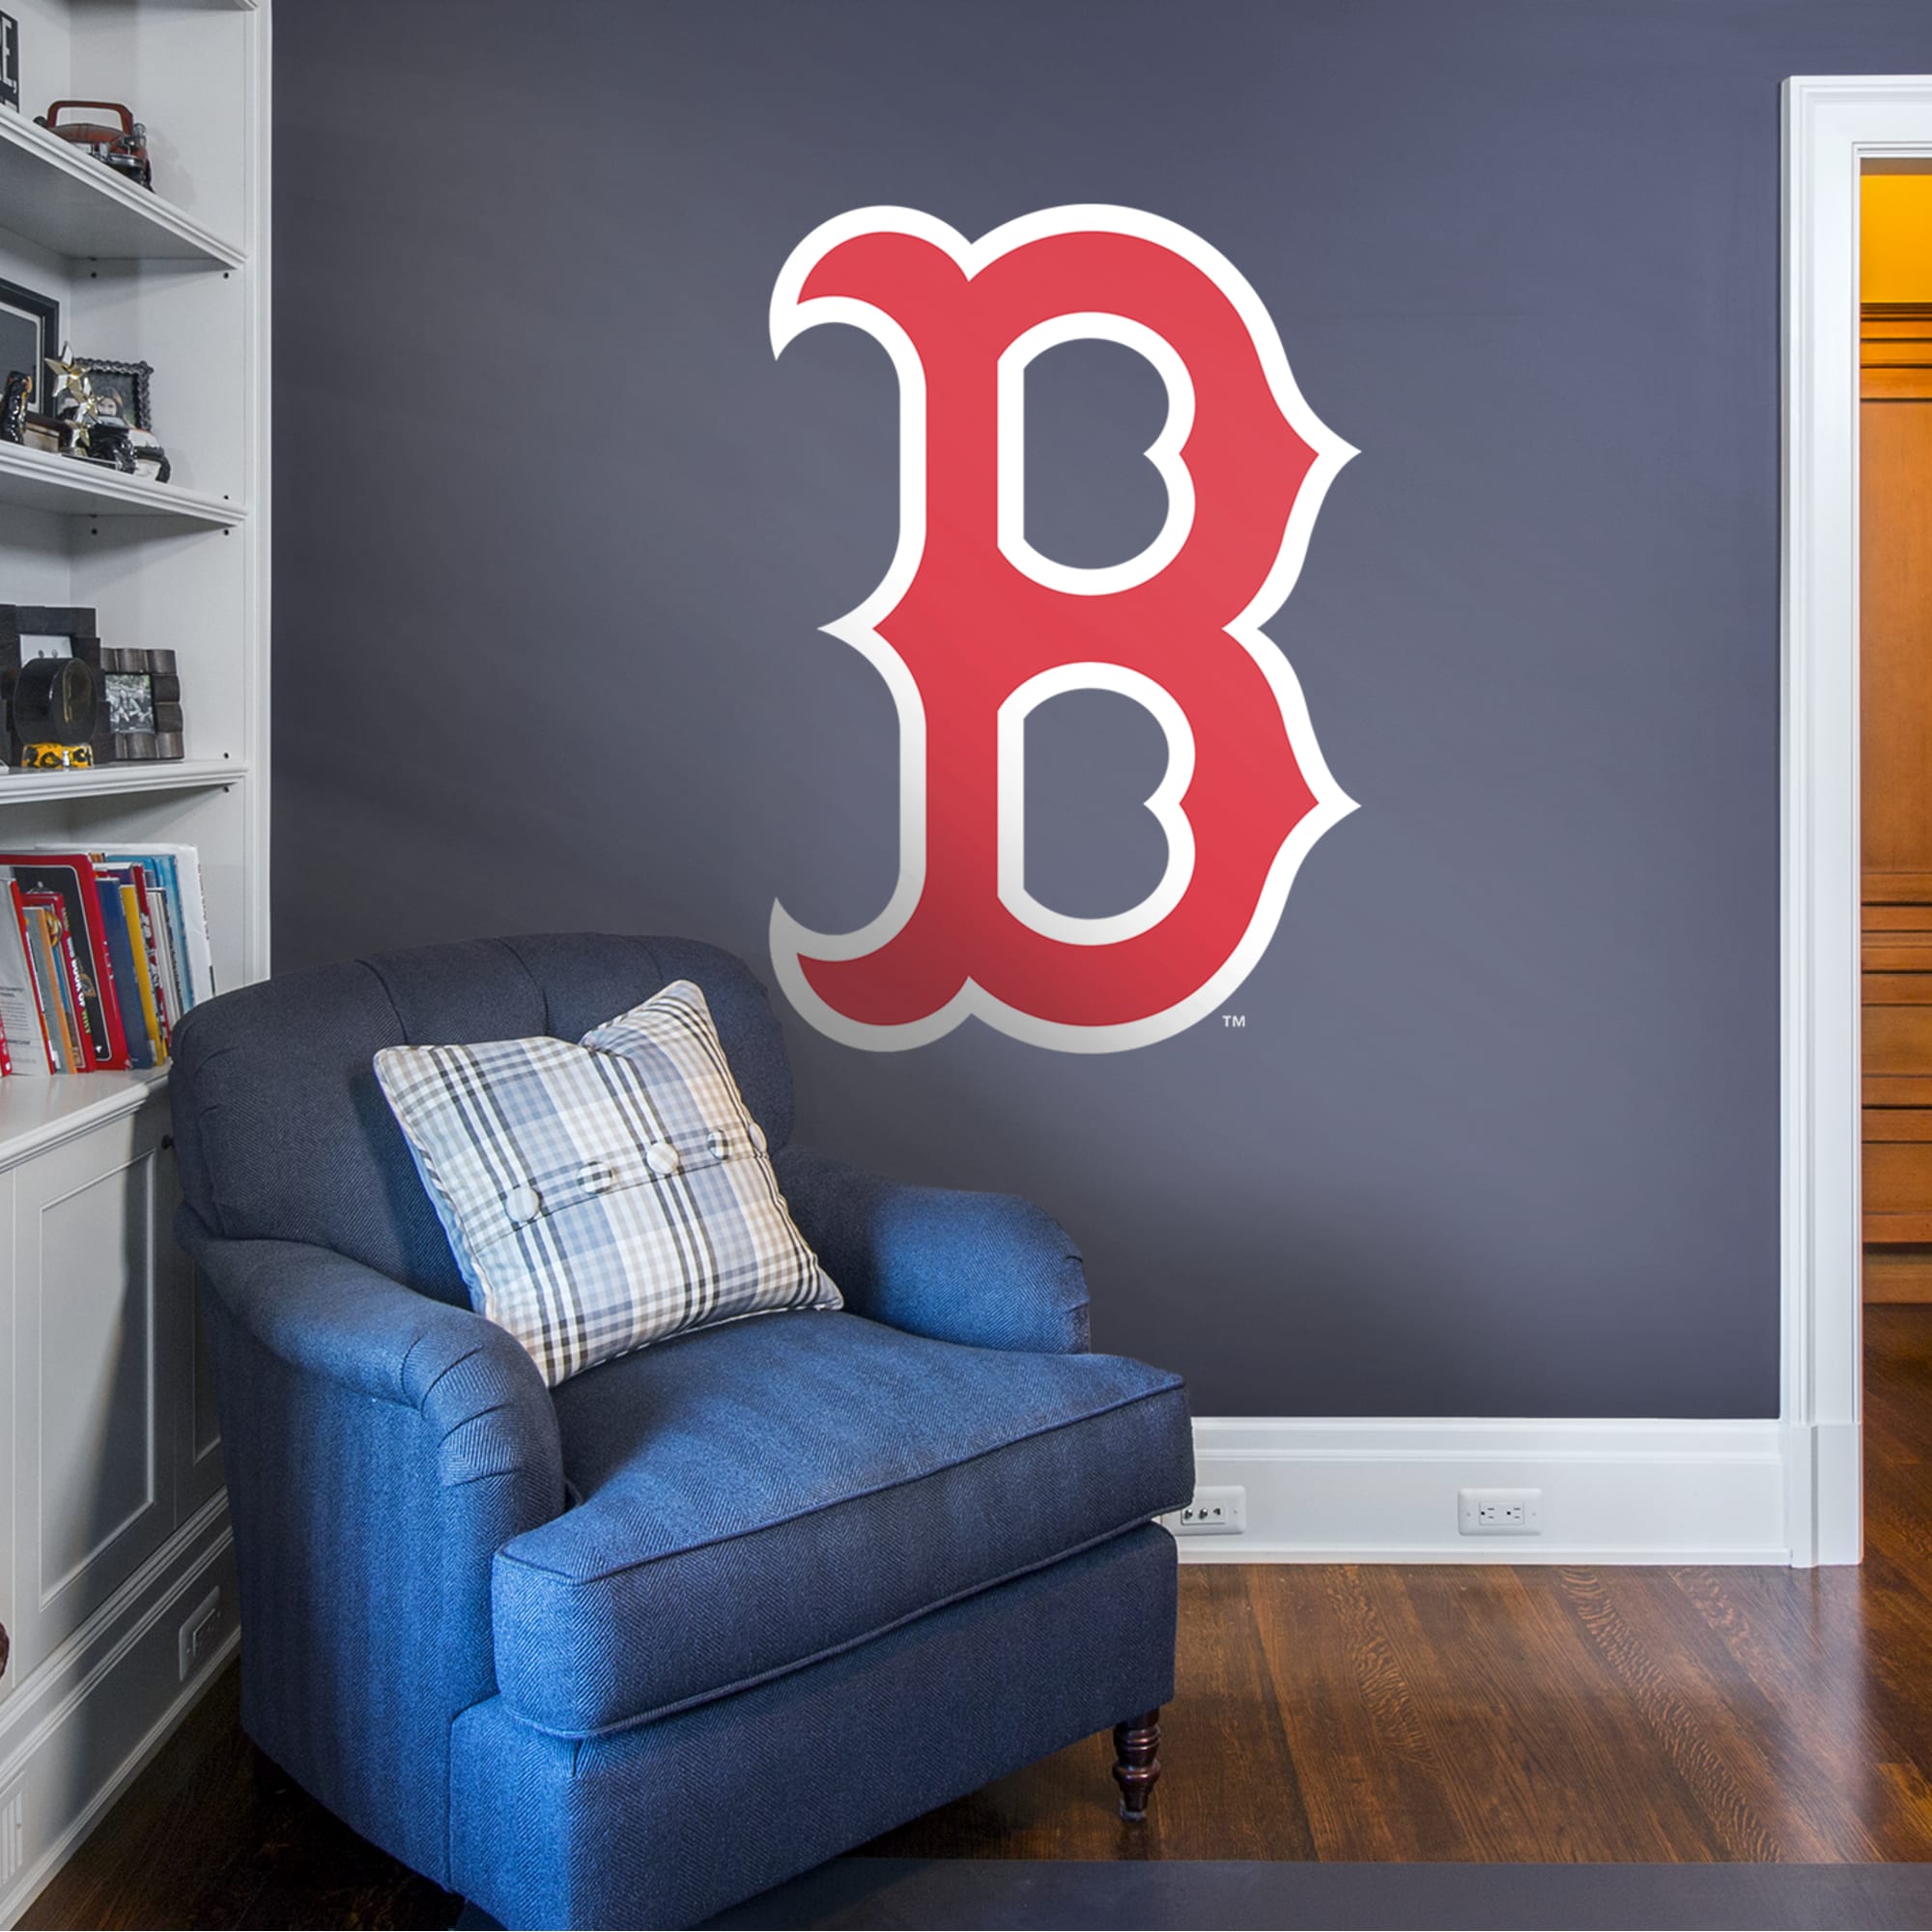 Boston Red Sox: "B" Logo - Officially Licensed MLB Removable Wall Decal Giant Logo (36"W x 51"H) by Fathead | Vinyl